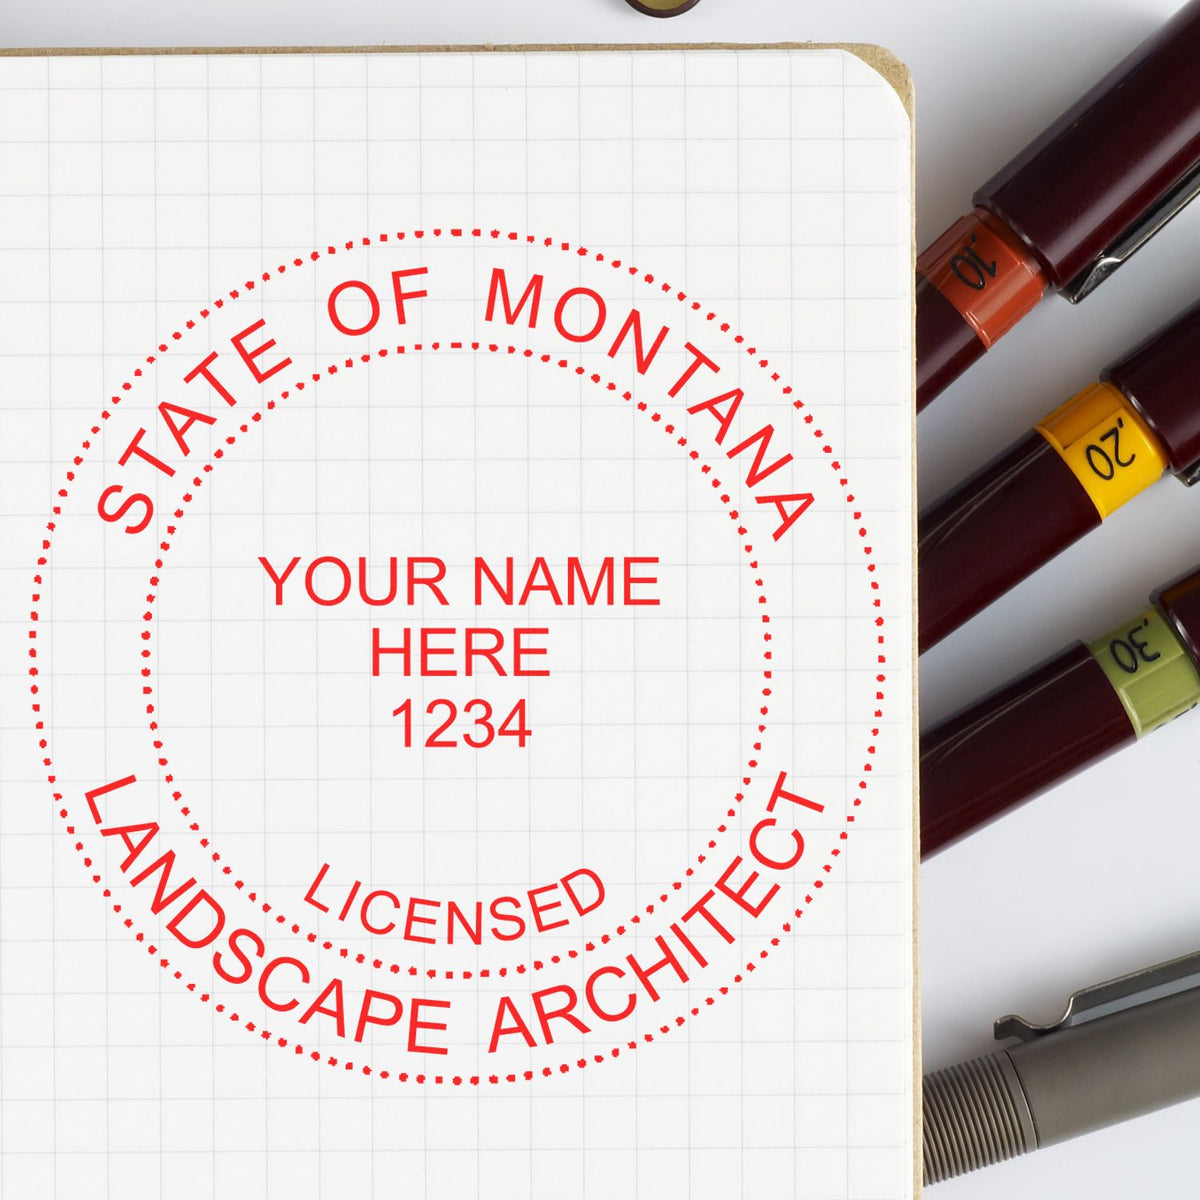 A stamped impression of the Self-Inking Montana Landscape Architect Stamp in this stylish lifestyle photo, setting the tone for a unique and personalized product.